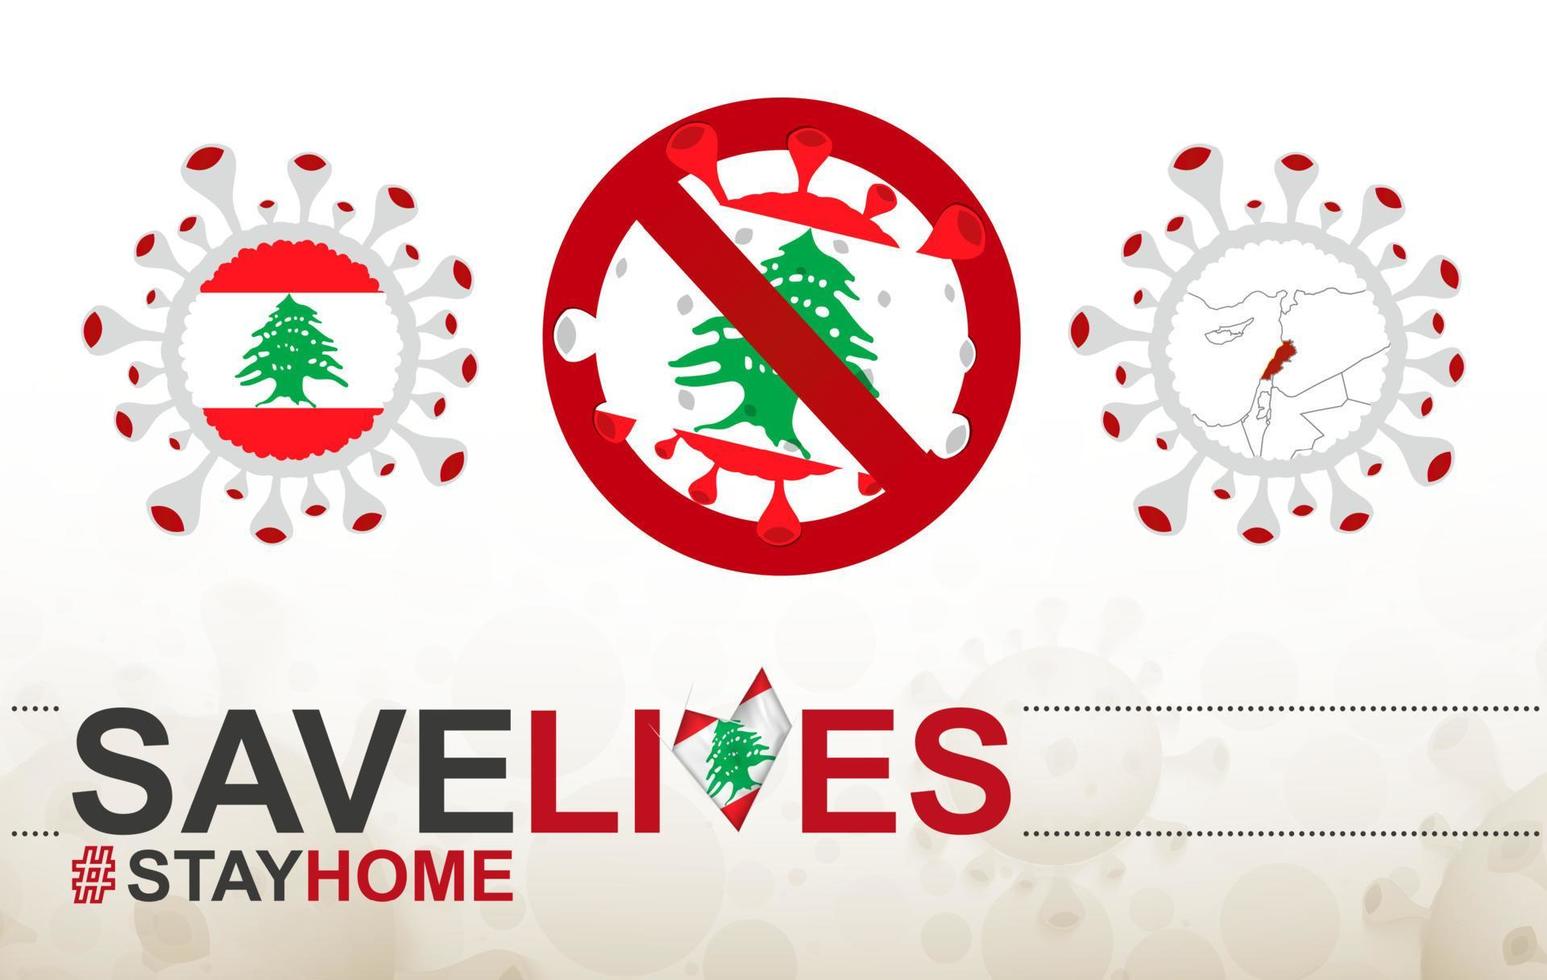 Coronavirus cell with Lebanon flag and map. Stop COVID-19 sign, slogan save lives stay home with flag of Lebanon vector